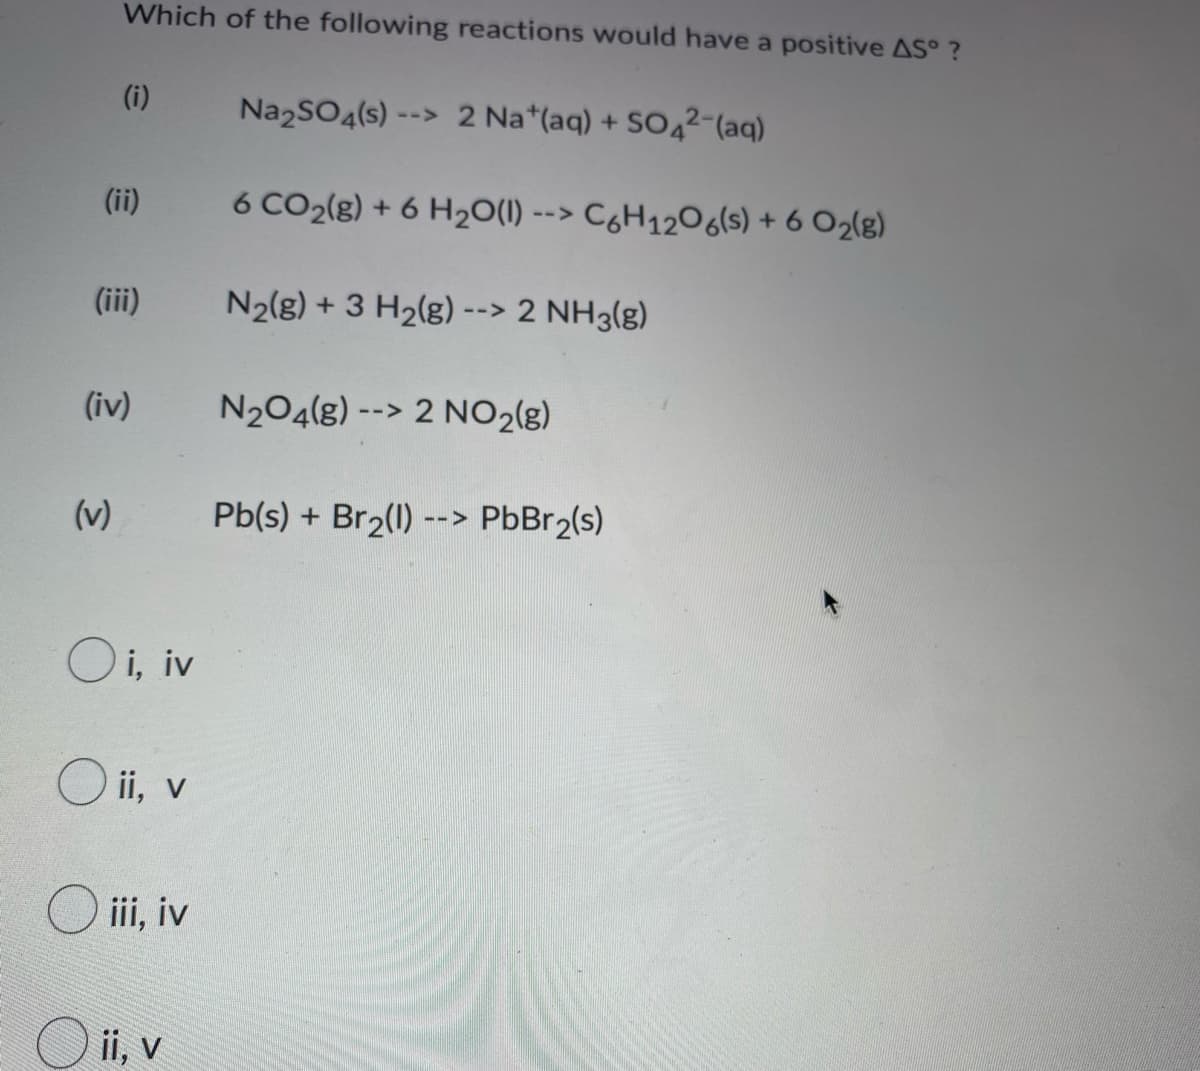 Which of the following reactions would have a positive AS°?
(i)
Na₂SO4(s)-
-->
2 Nat(aq) + SO4²-(aq)
6 CO2(g) + 6 H₂O(l) --> C6H12O6(s) + 6 02(g)
N₂(g) + 3 H₂(g) --> 2 NH3(g)
N₂O4(g) --> 2 NO₂(g)
Pb(s) + Br₂(1) --> PbBr₂(s)
(ii)
(iii)
(iv)
(v)
Oi, iv
O ii, v
Oiii, iv
O ii, v